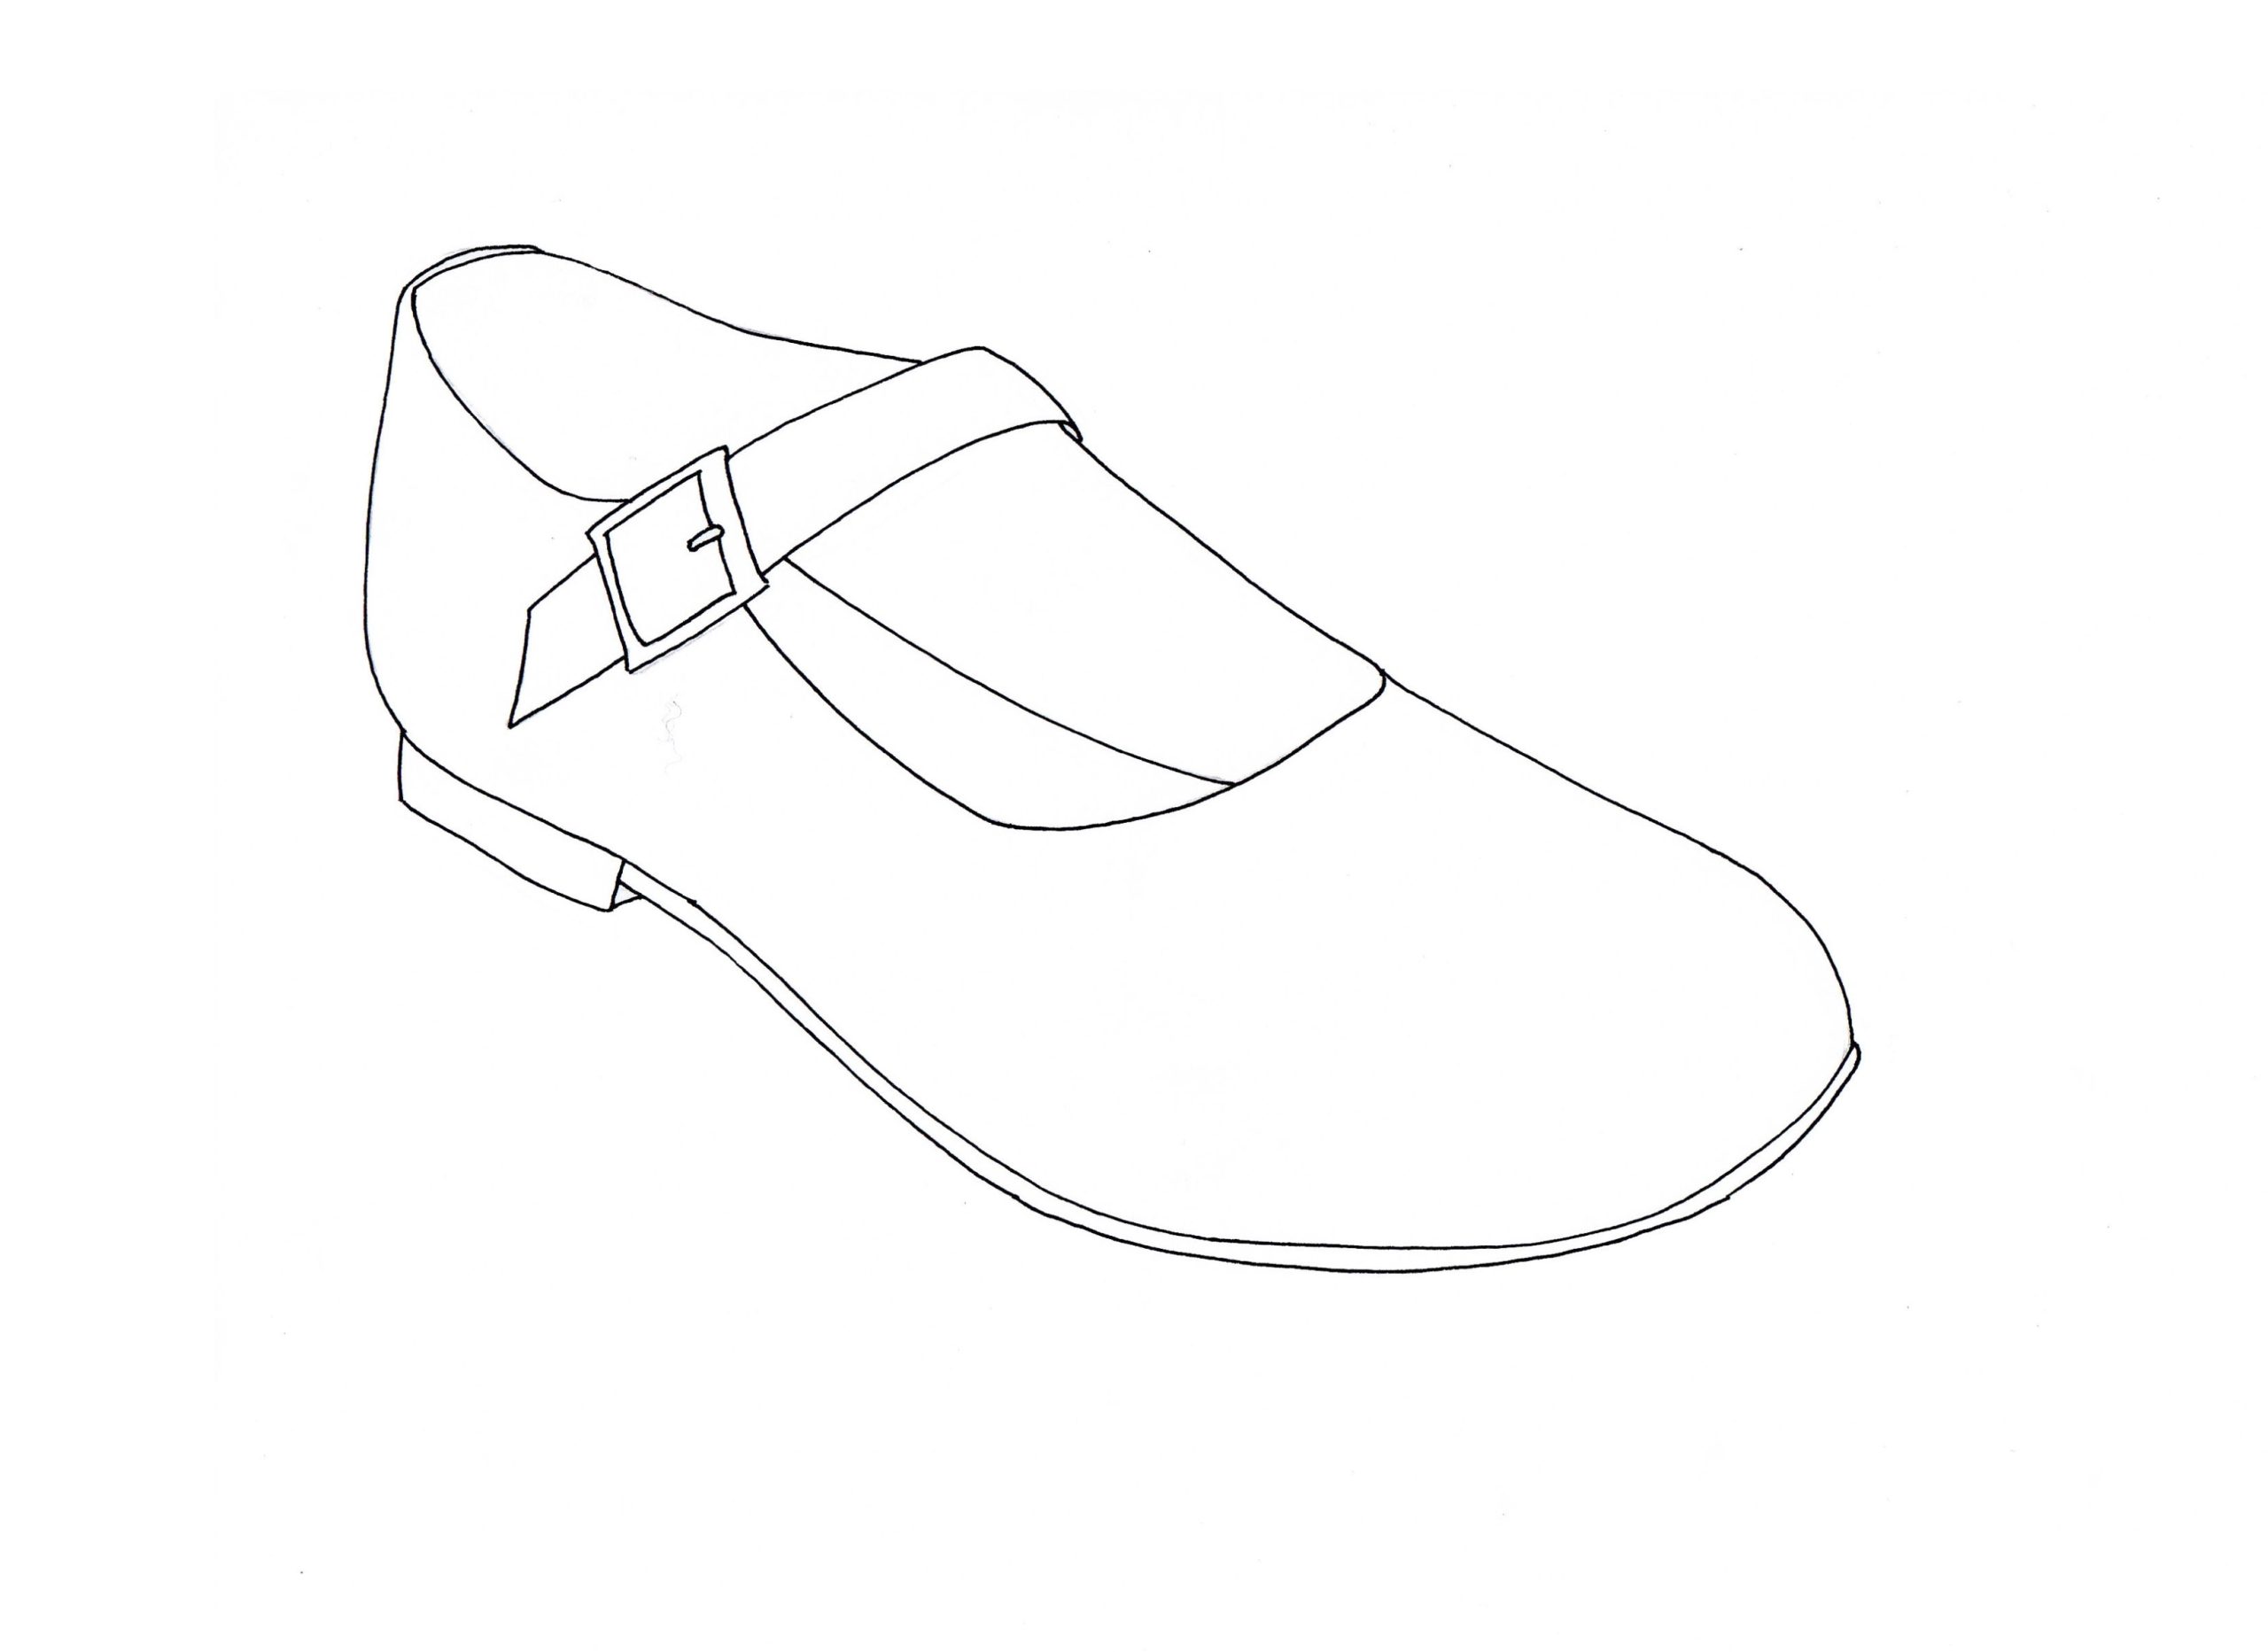 High Heel Drawing Template At Getdrawings | Free Download For High Heel Shoe Template For Card